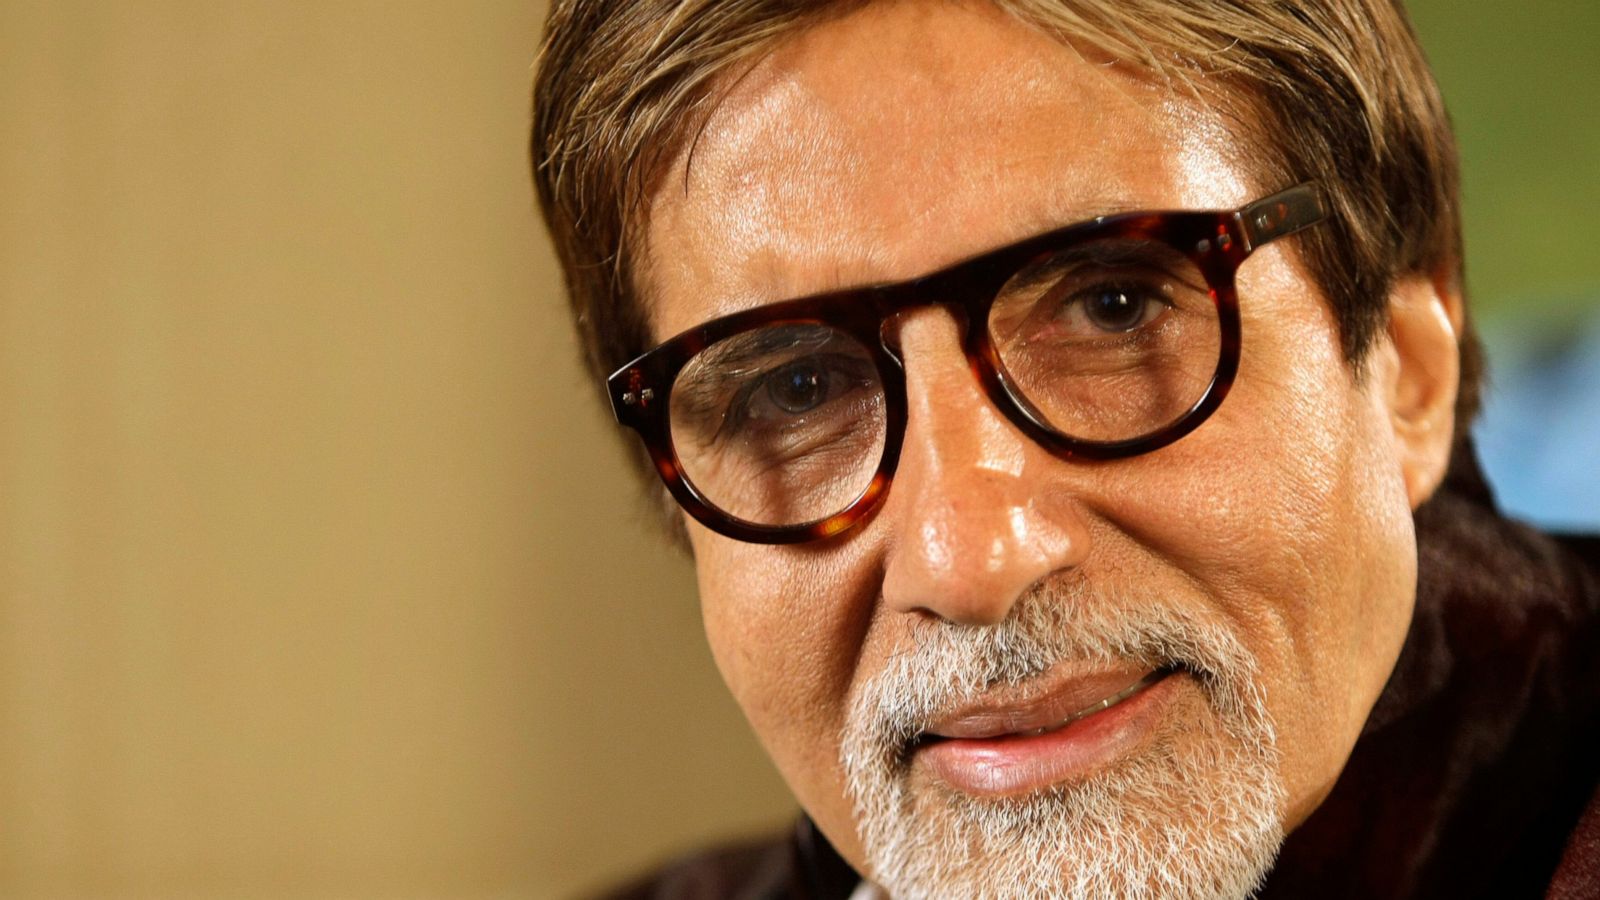 Frontlist | Amitabh Bachchan dedicates poetry 'to them that work tirelessly, relentlessly, unselfishly to keep us protected'